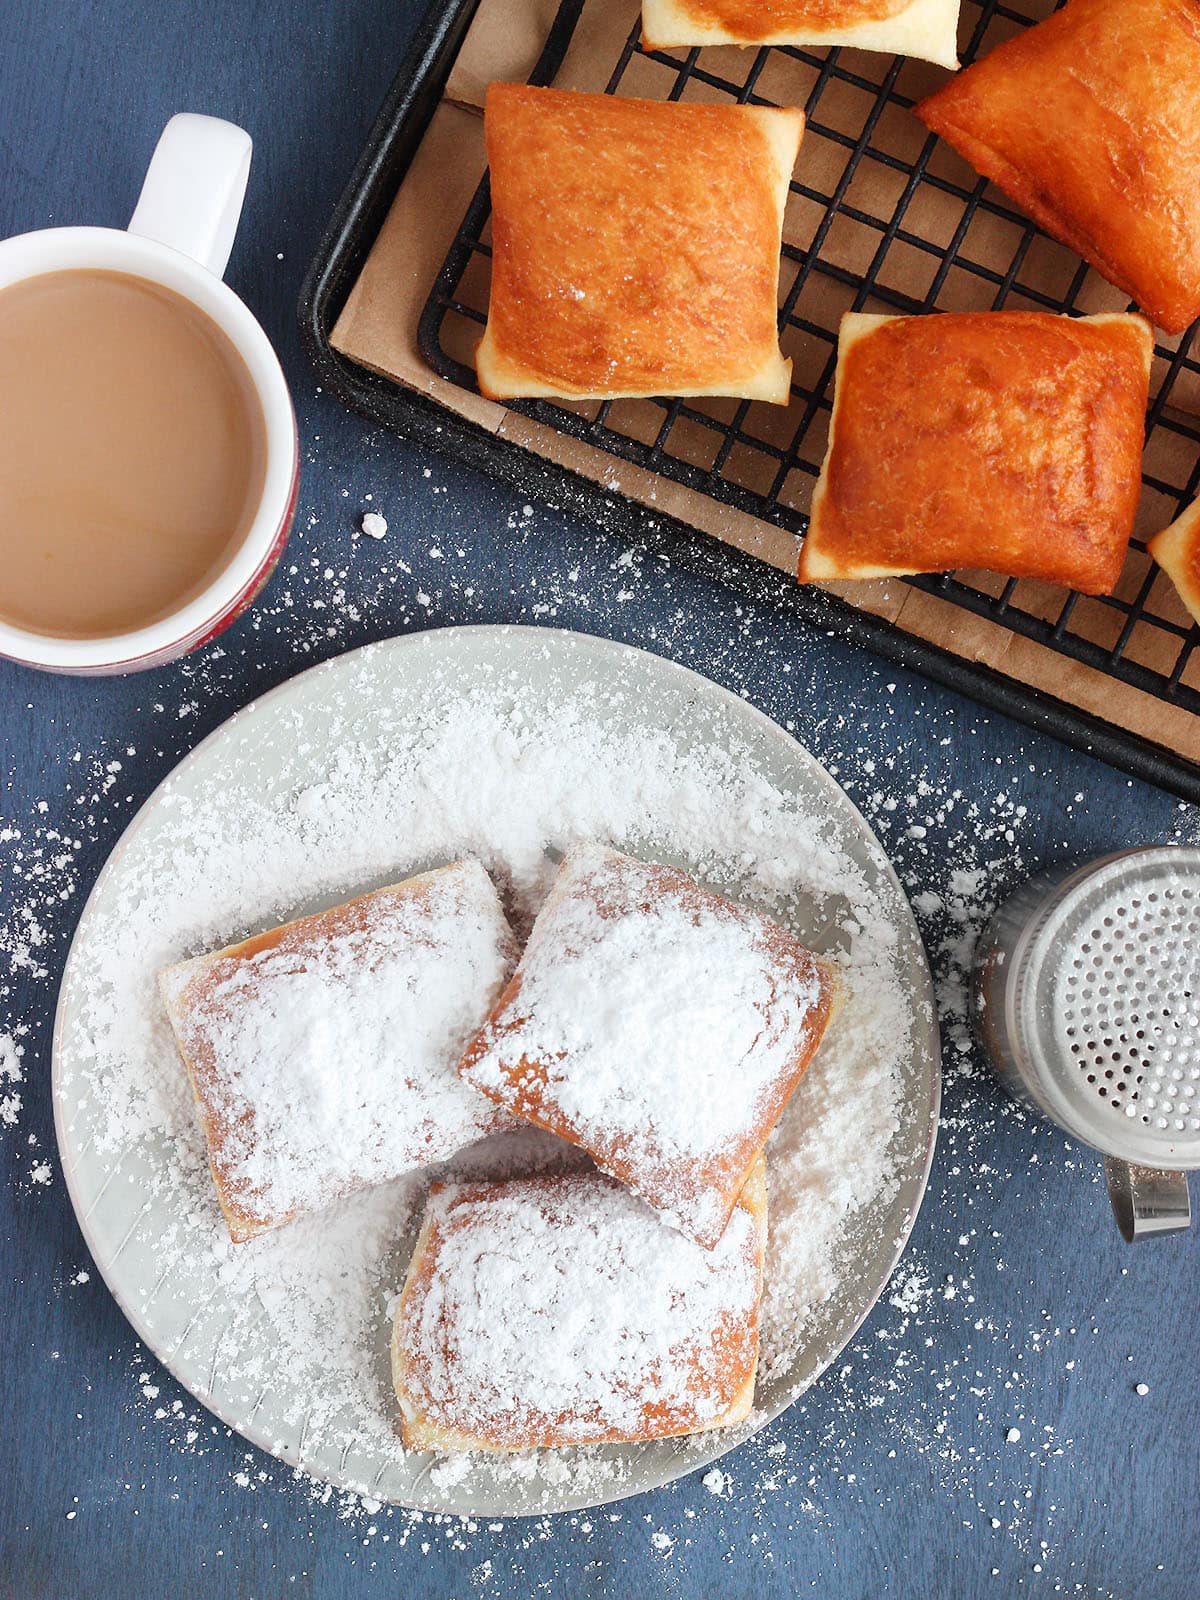 beignets on a grey plate covered in powdered sugar with a mug of cafe au lait on the side